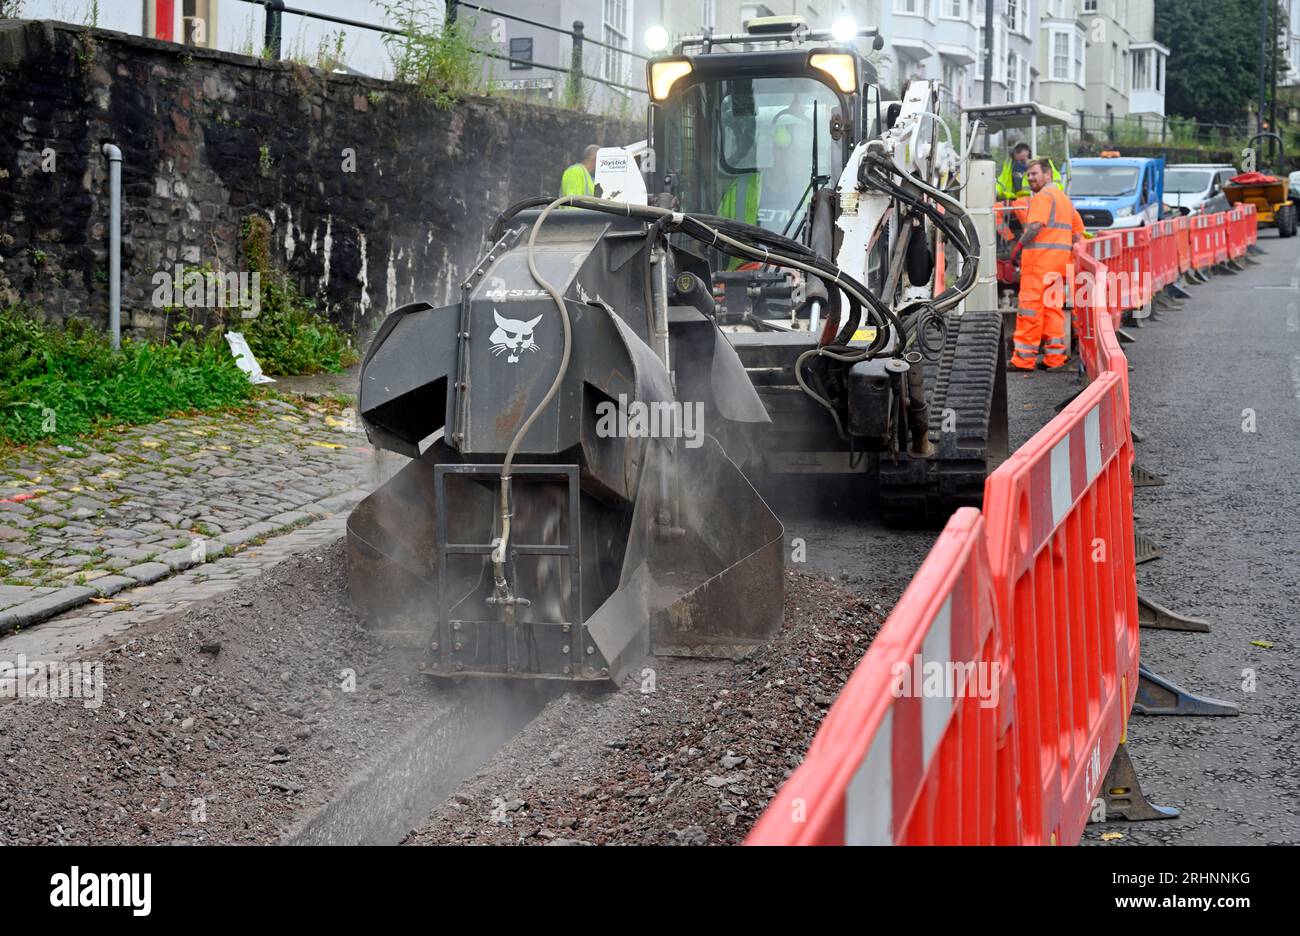 Trenching machine (Bobcat) being used for cutting channel through pavement  in street to lay duck work for fibre optic cable, UK Stock Photo - Alamy